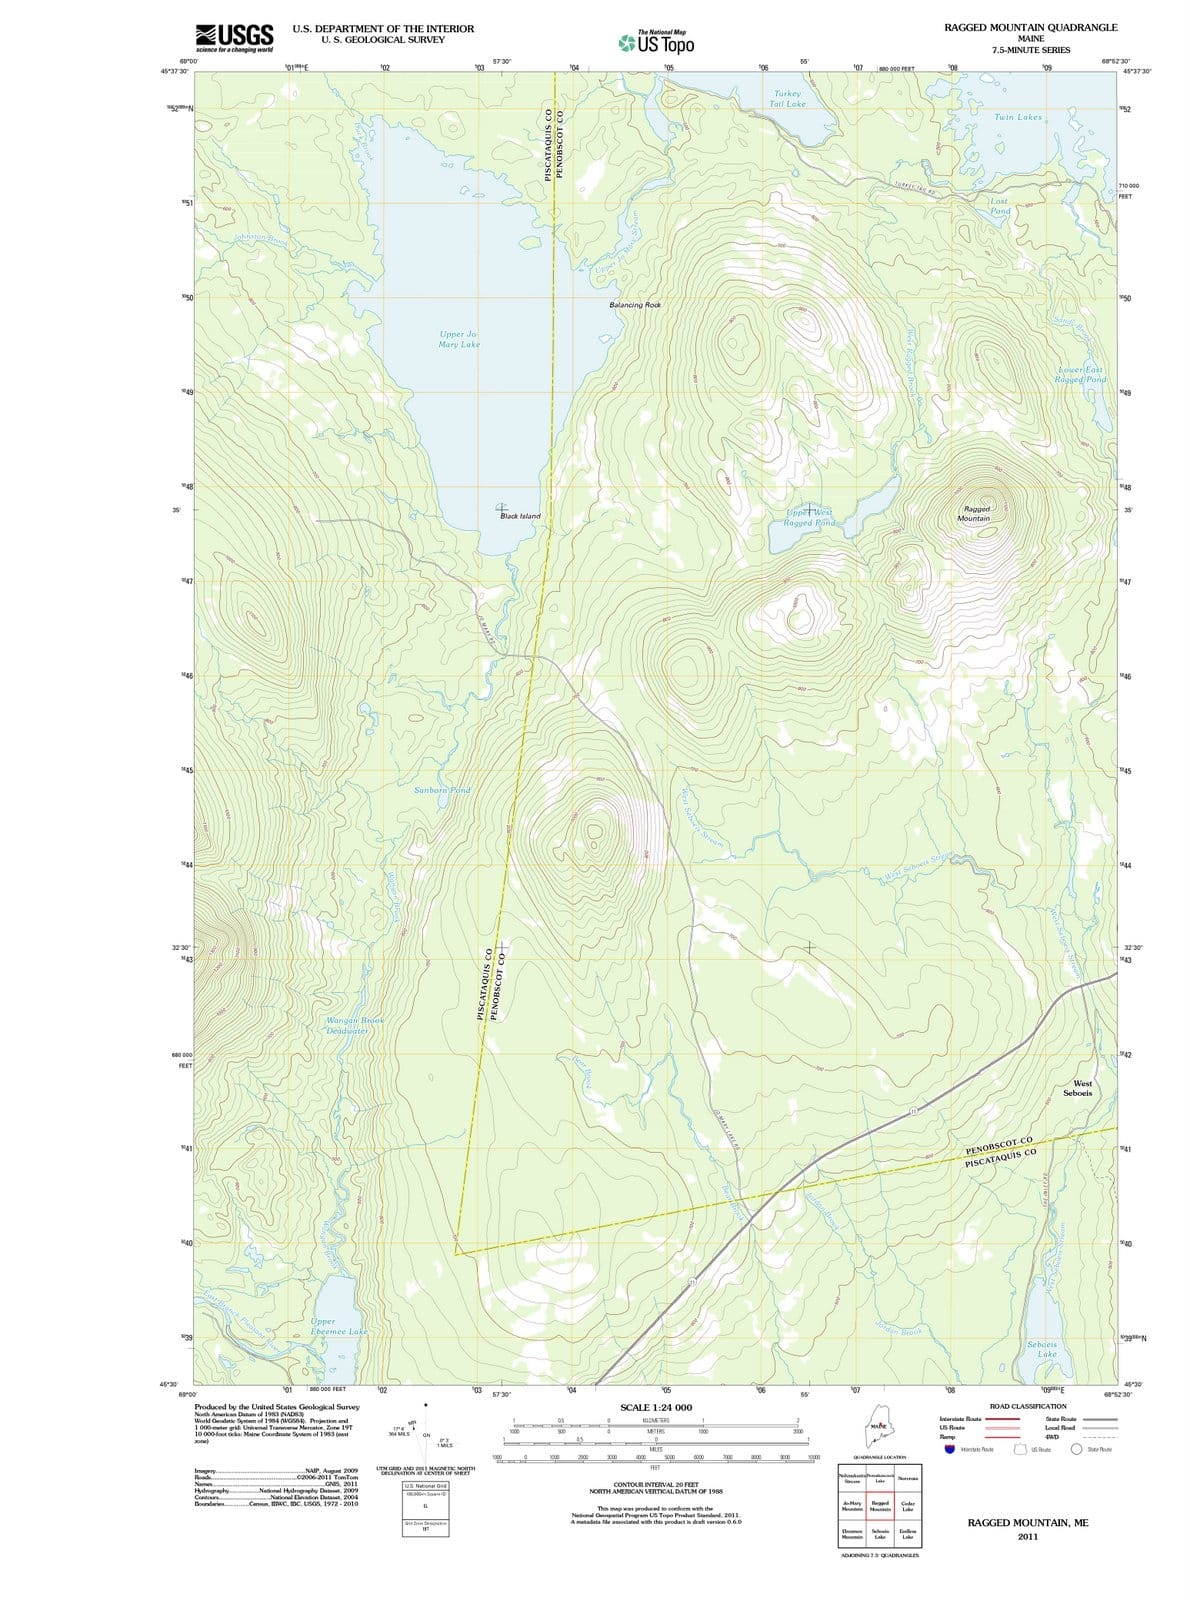 2011 Ragged Mountain, ME - Maine - USGS Topographic Map